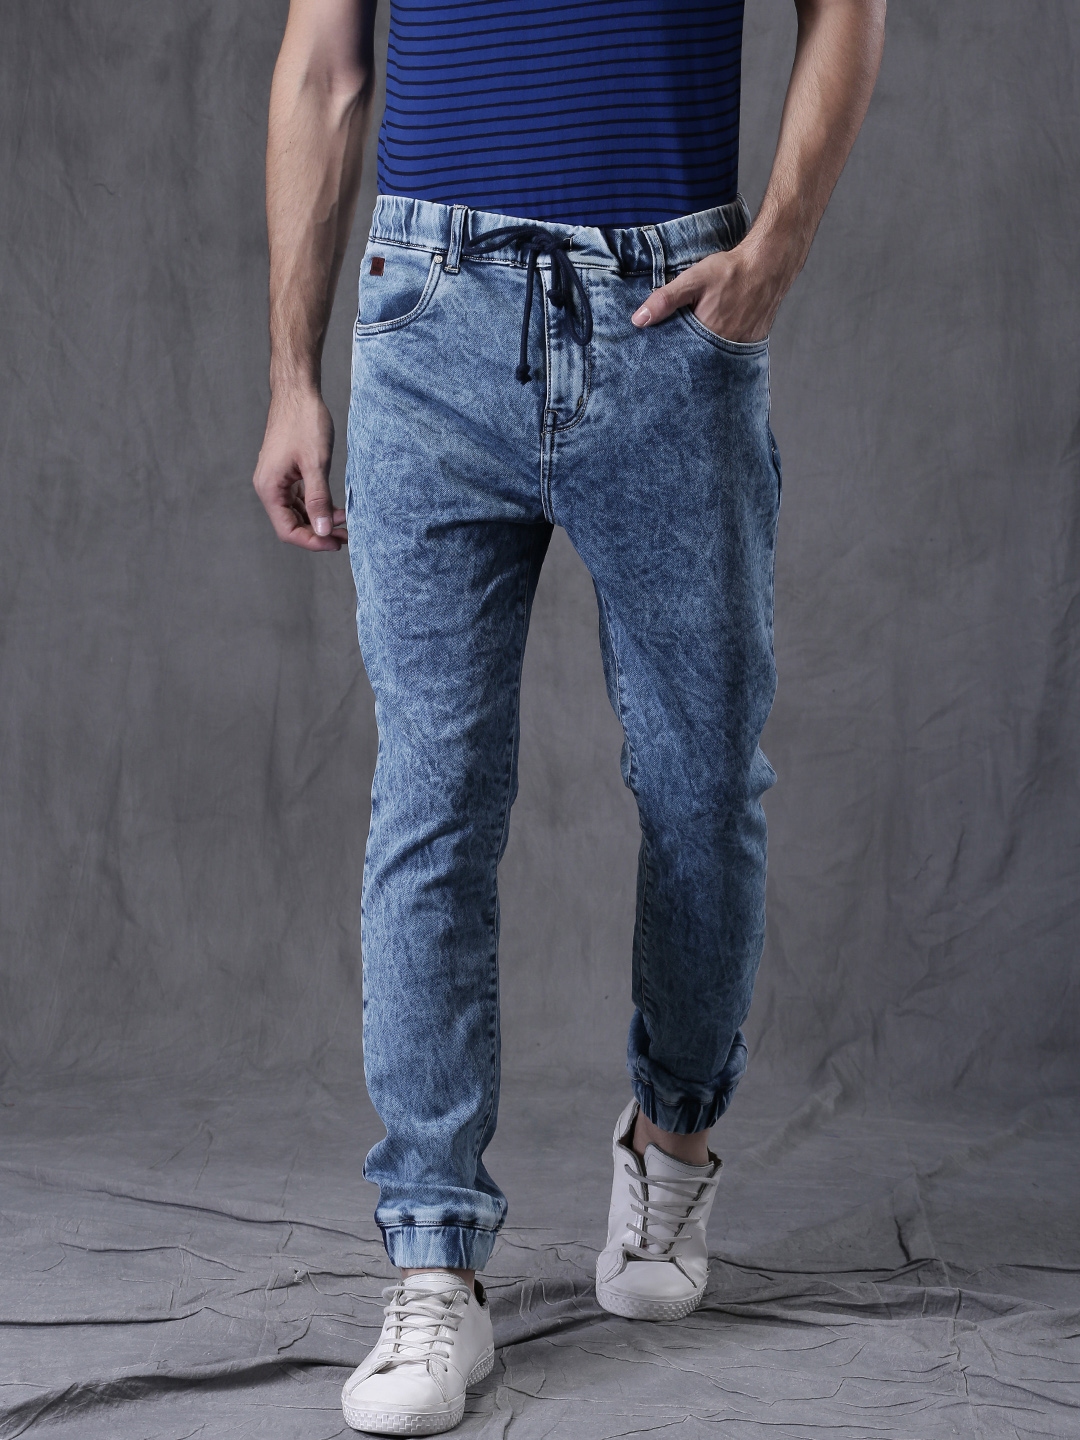 wrogn jeans joggers